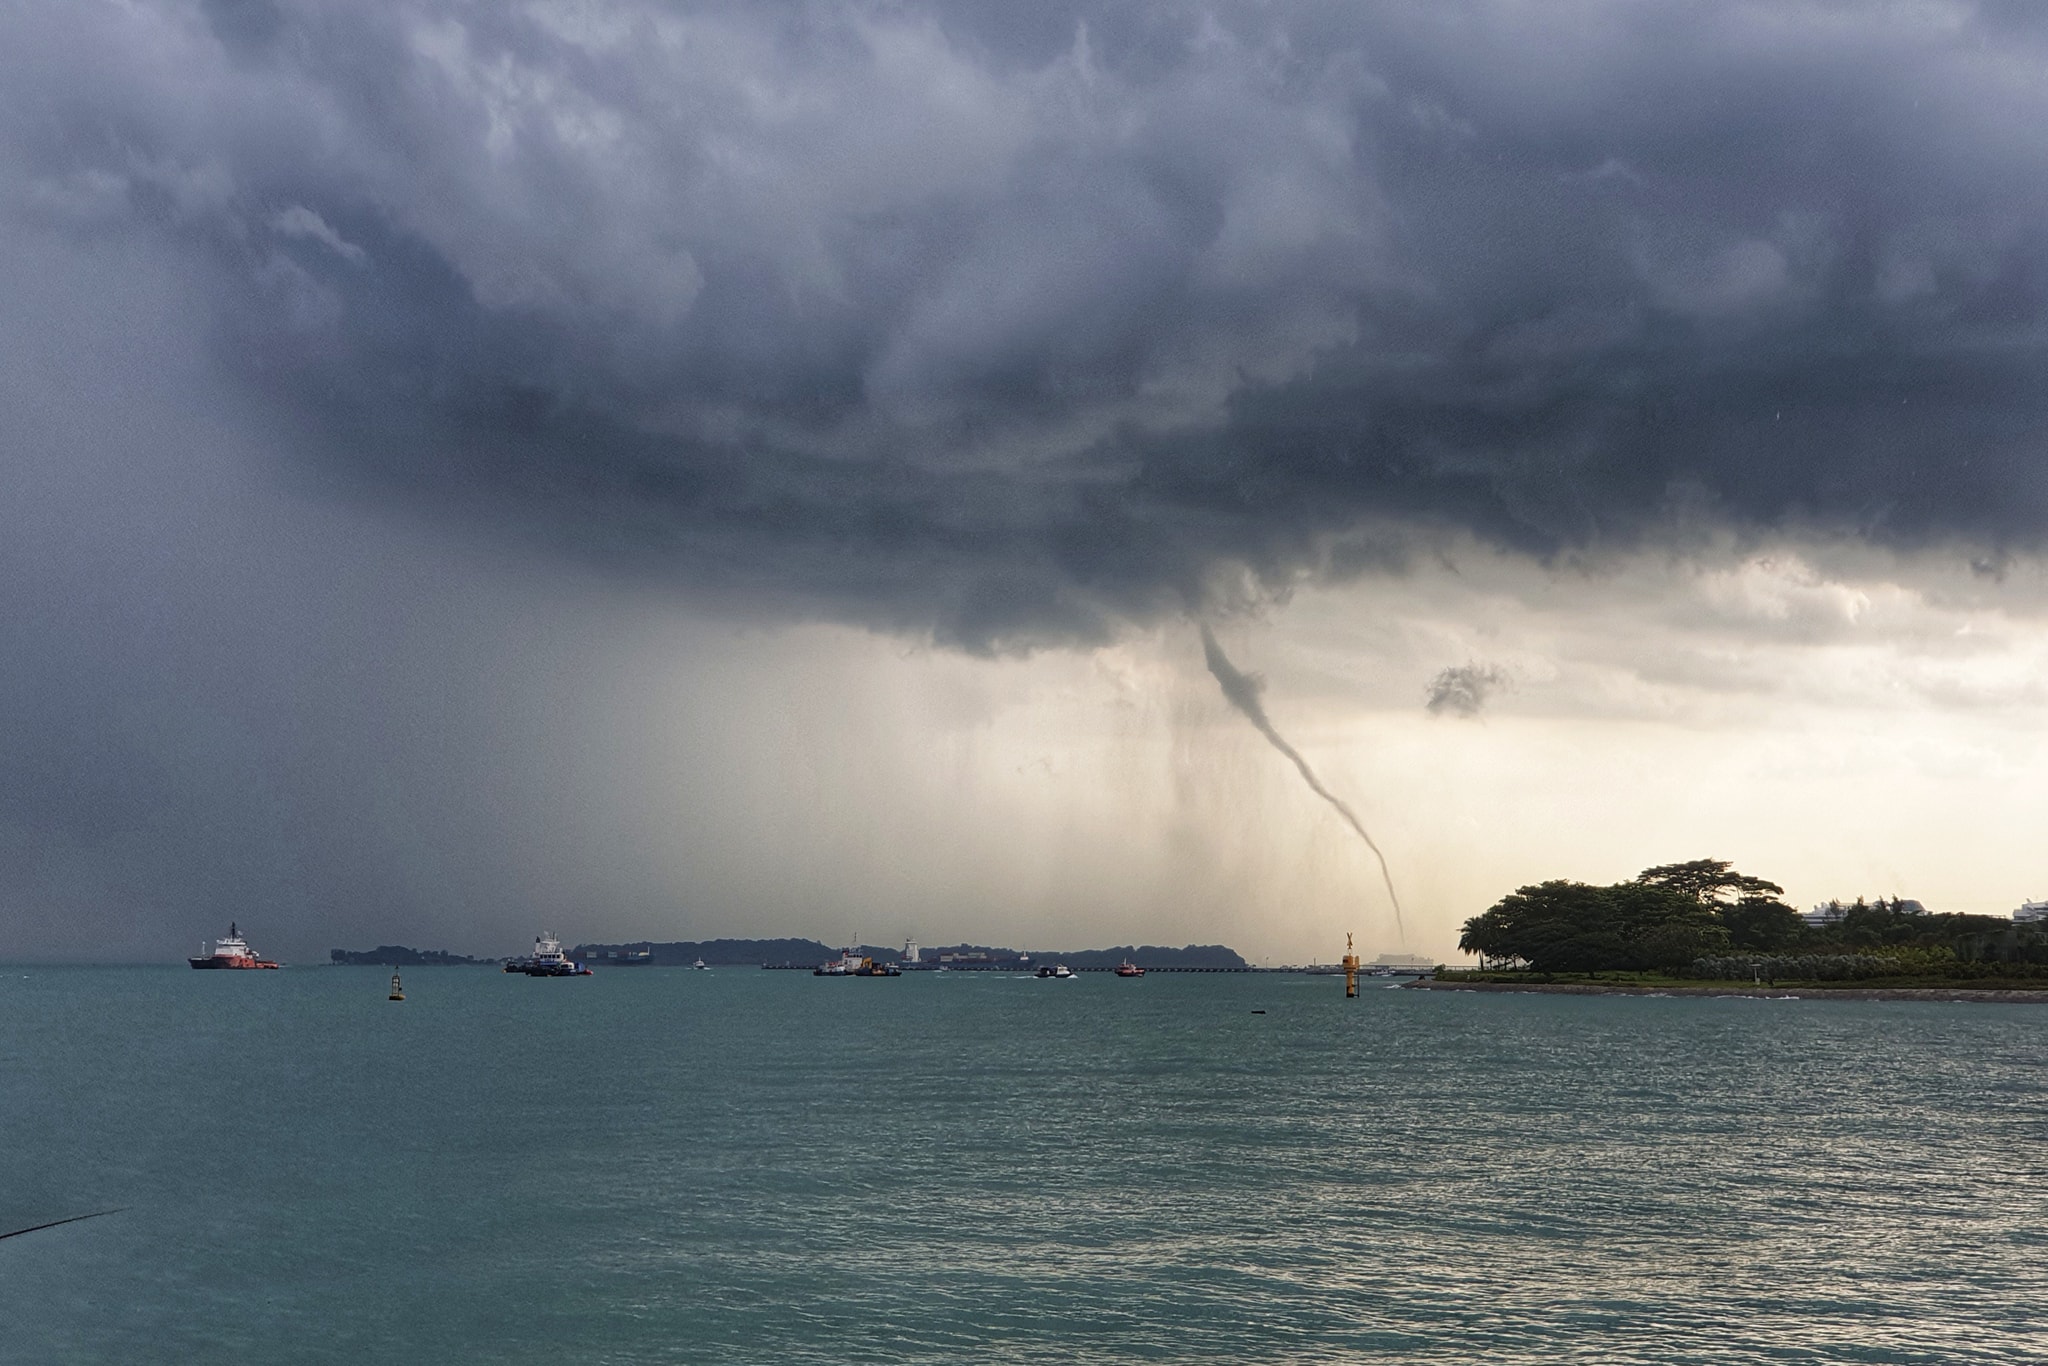 The waterspout near the southern coast of Singapore on Dec. 6, 2020. Photo: Chee Peng Ong/Facebook
